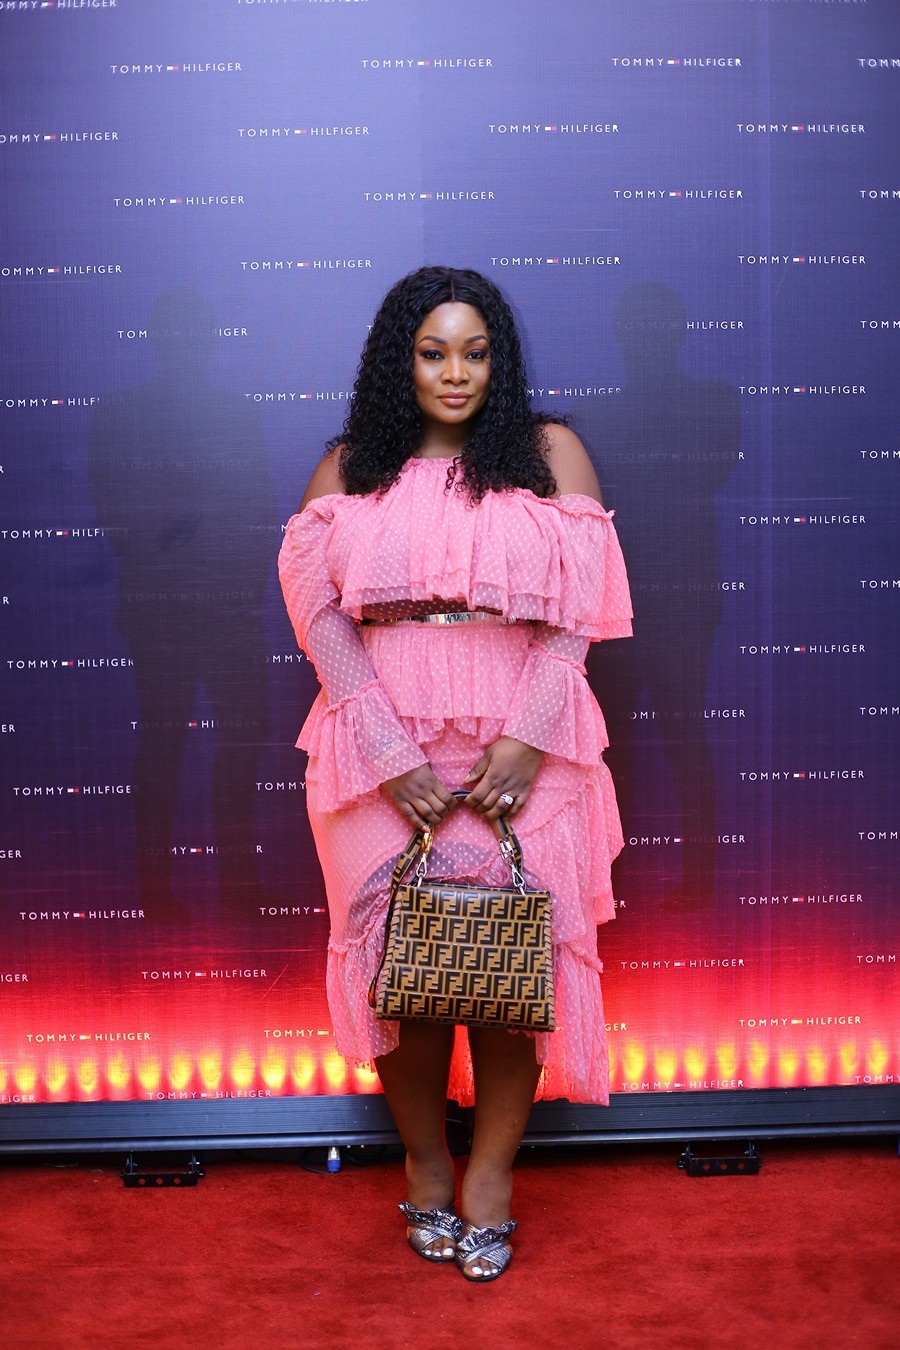 Nigerian Influencers & Celebrities Wear Tommy Hilfiger To Exclusive In-Store Event In Nigeria